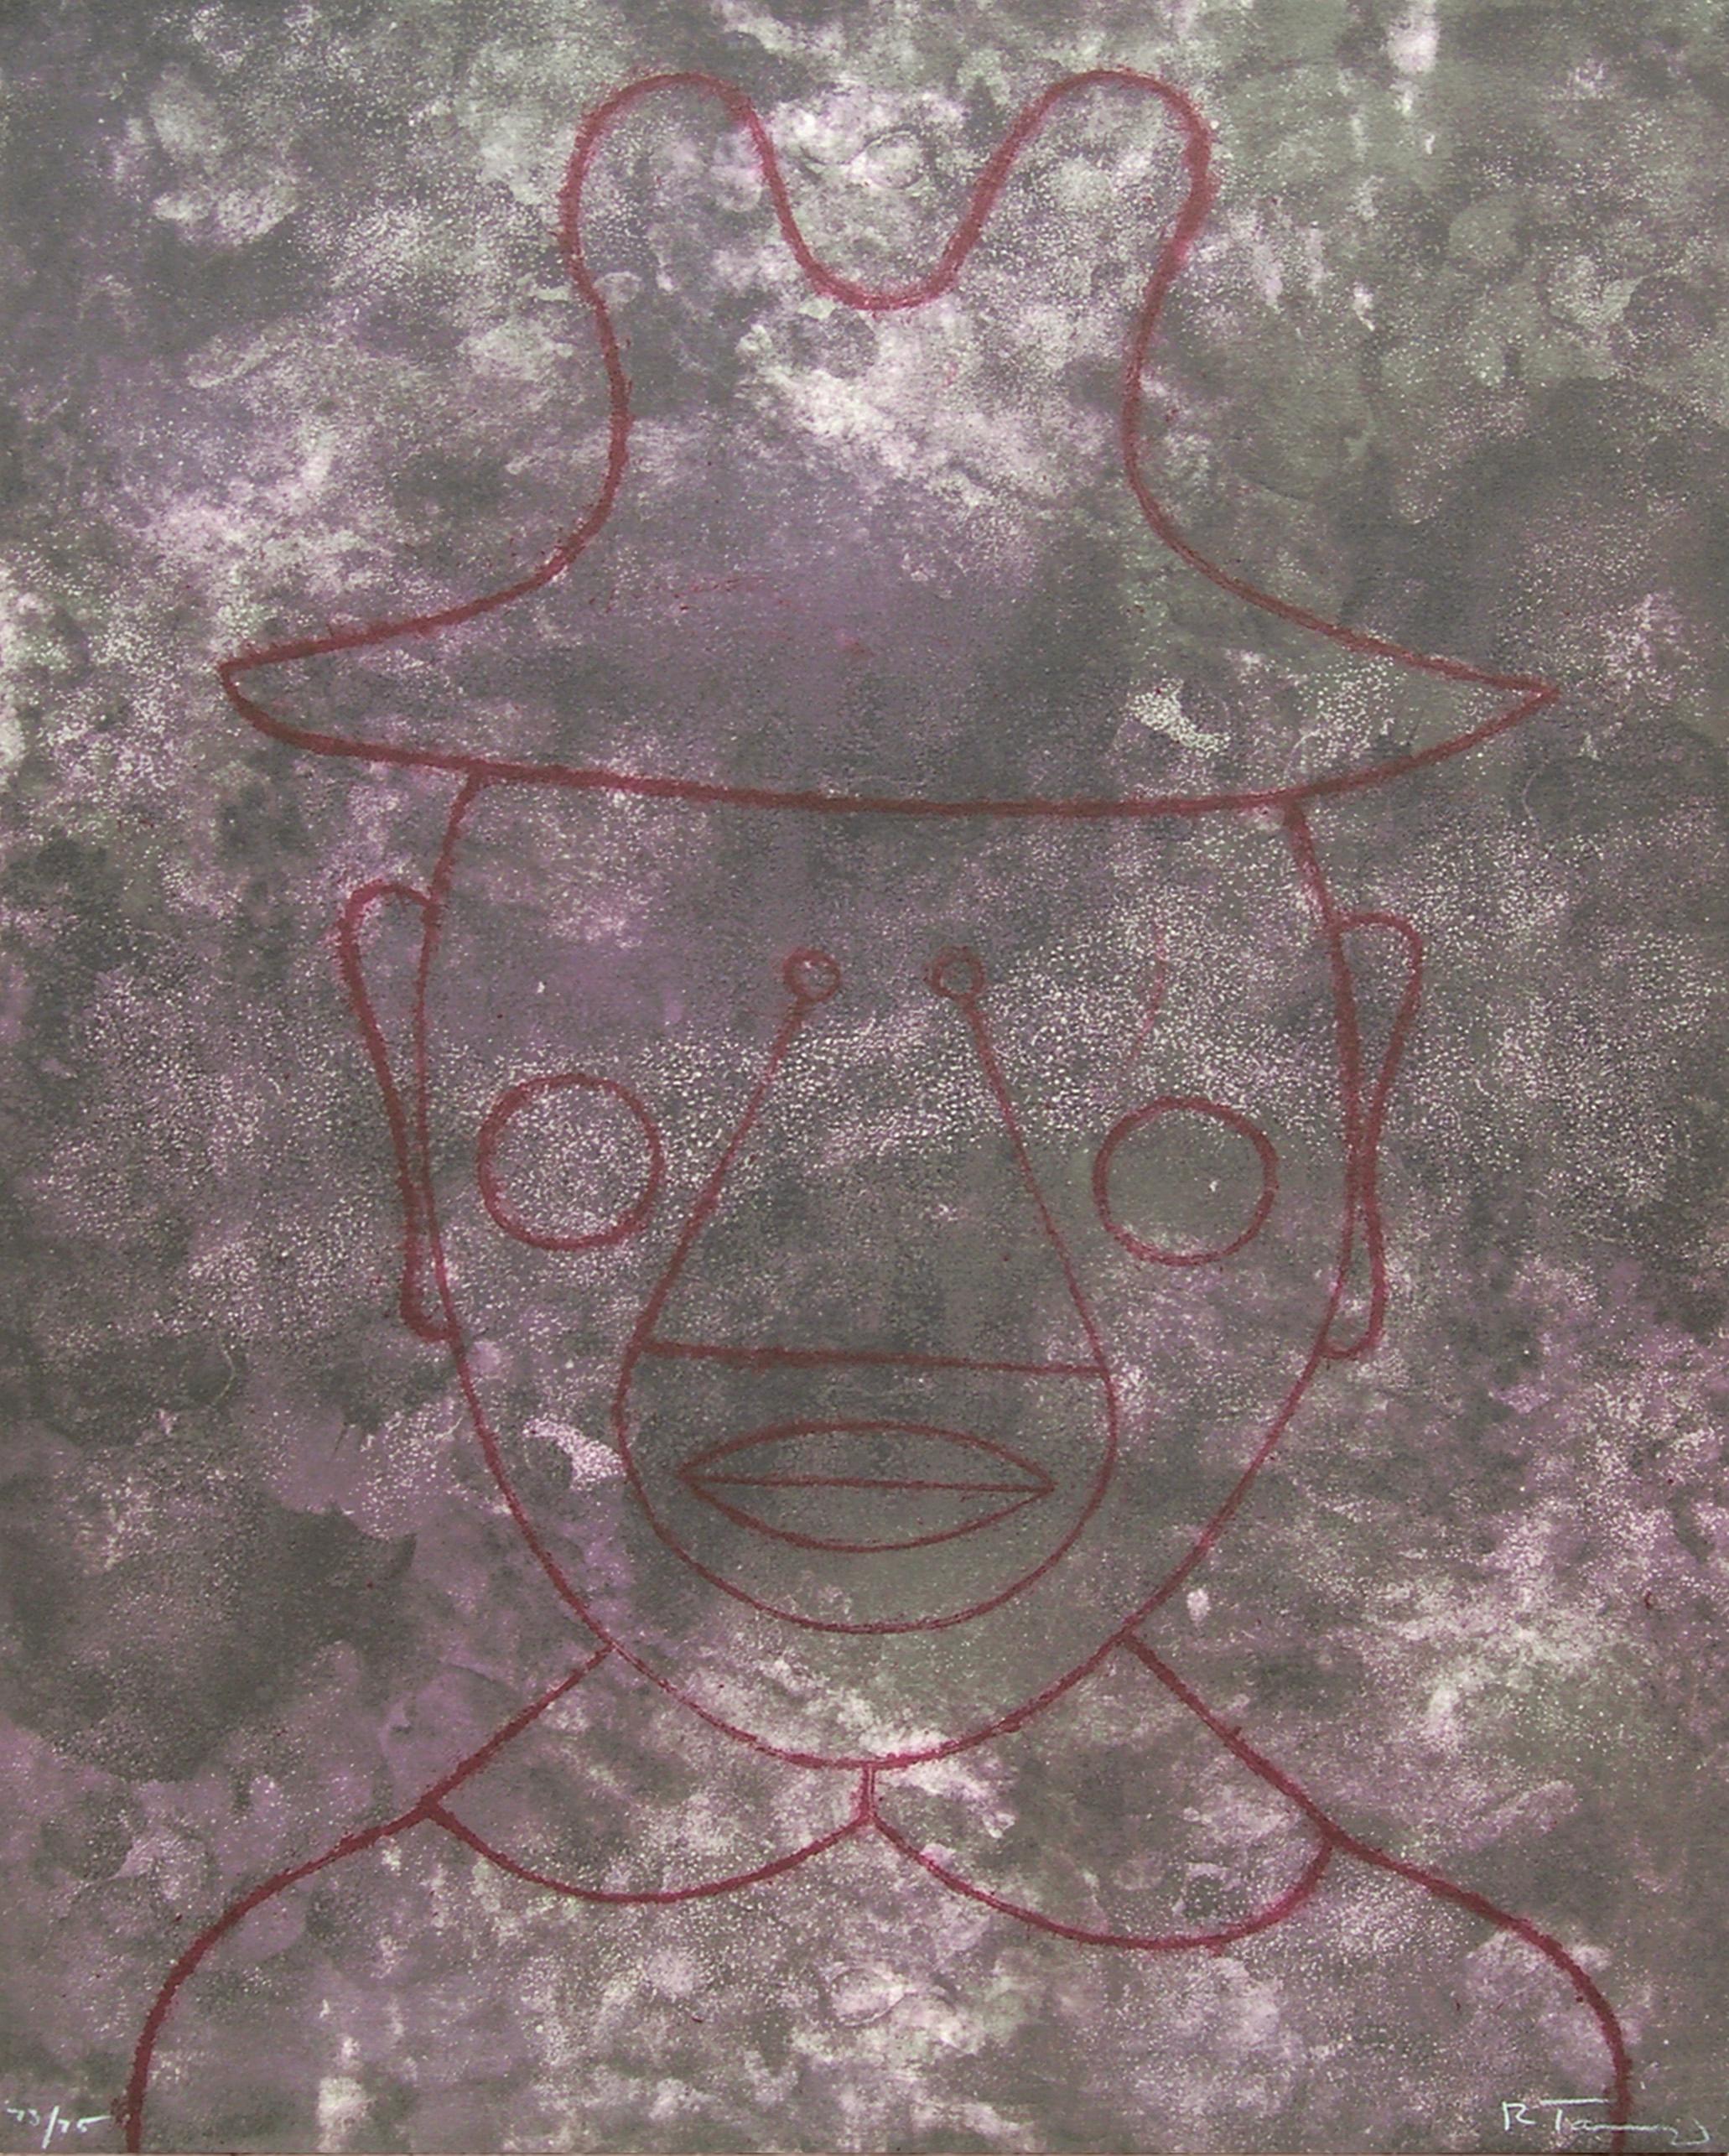 "Cabeza en Gris", Rufino Tamayo, Abstraction figurative, Lithographie, 76,2 x 55,9 cm.